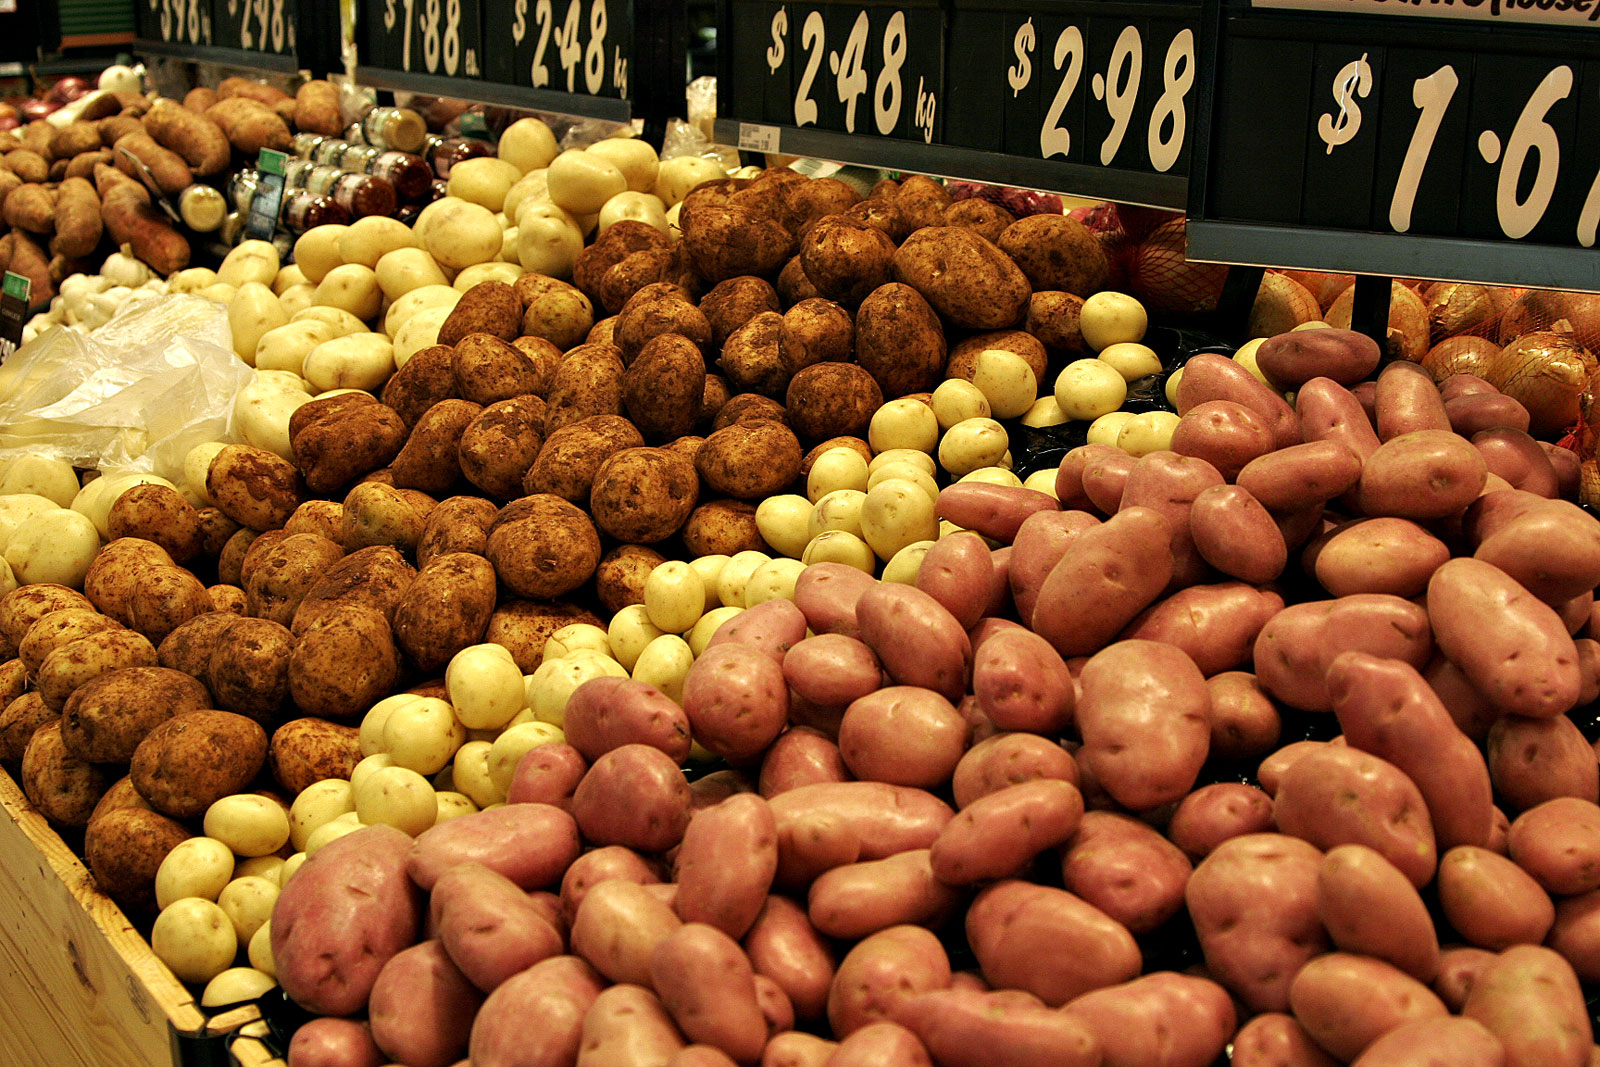 Various_types_of_potatoes_for_sale.jpg